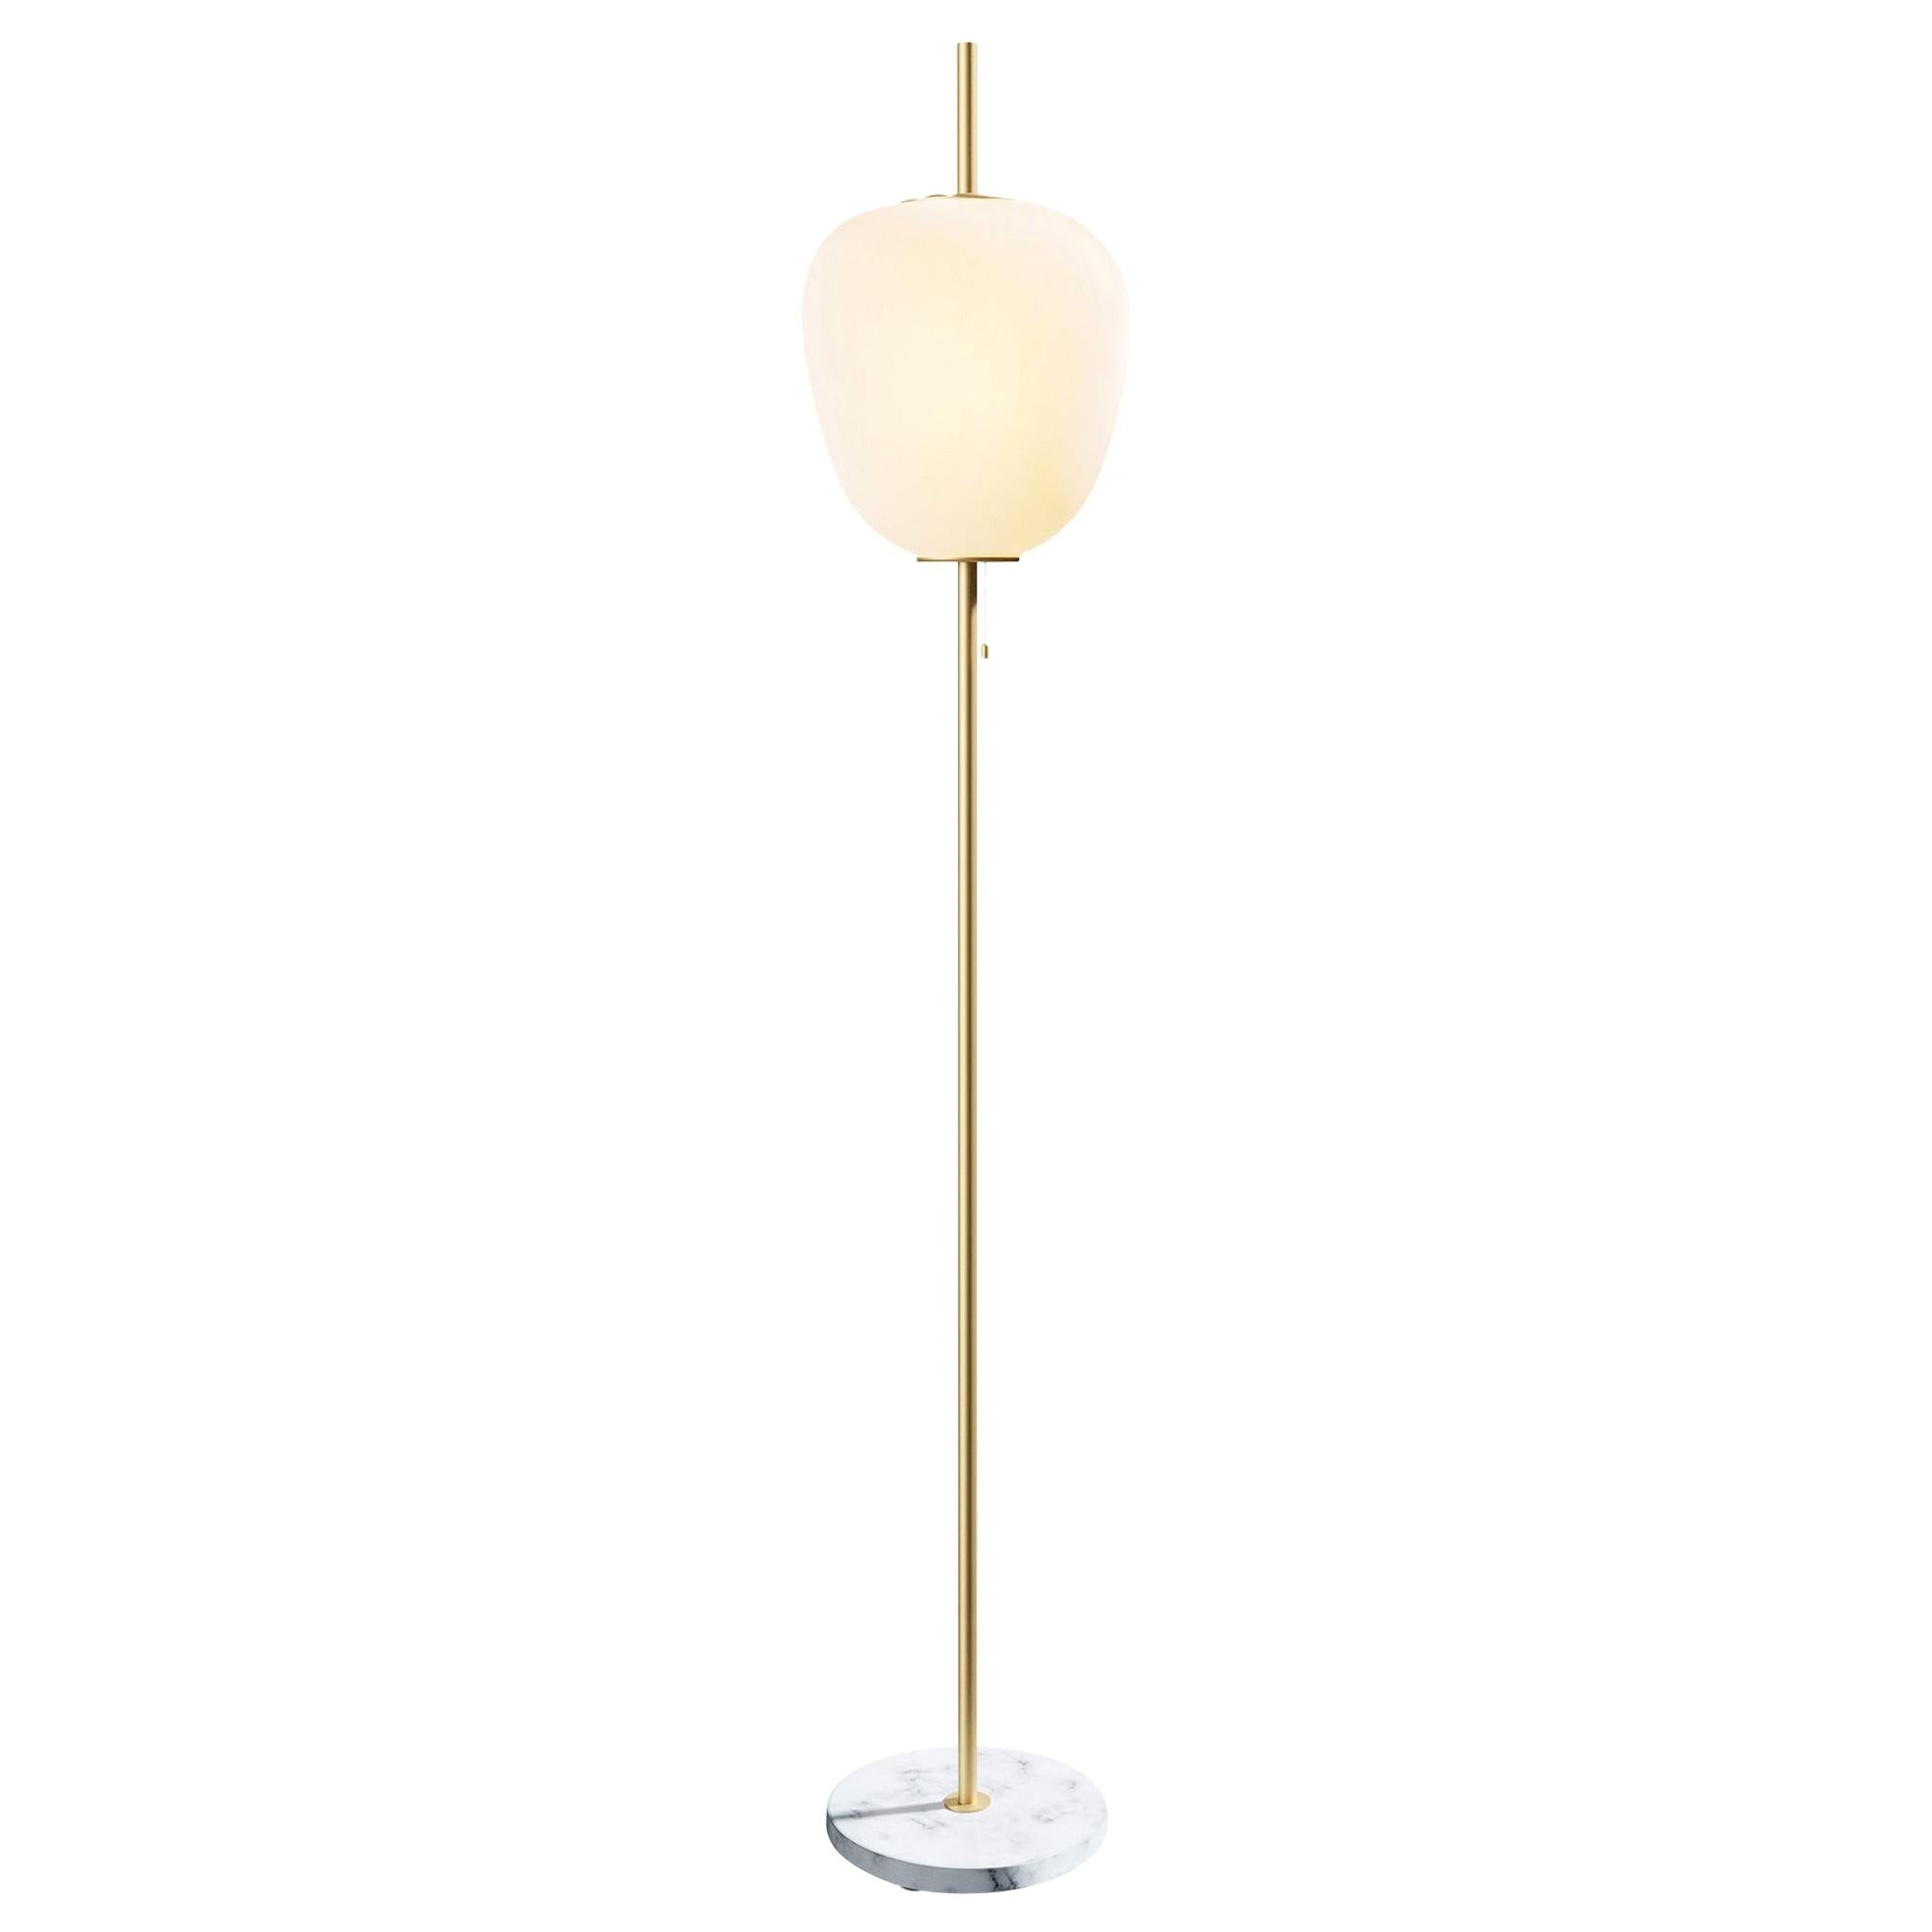 Large Joseph-André Motte J14 Floor Lamp in Brushed Brass and Marble for Disderot